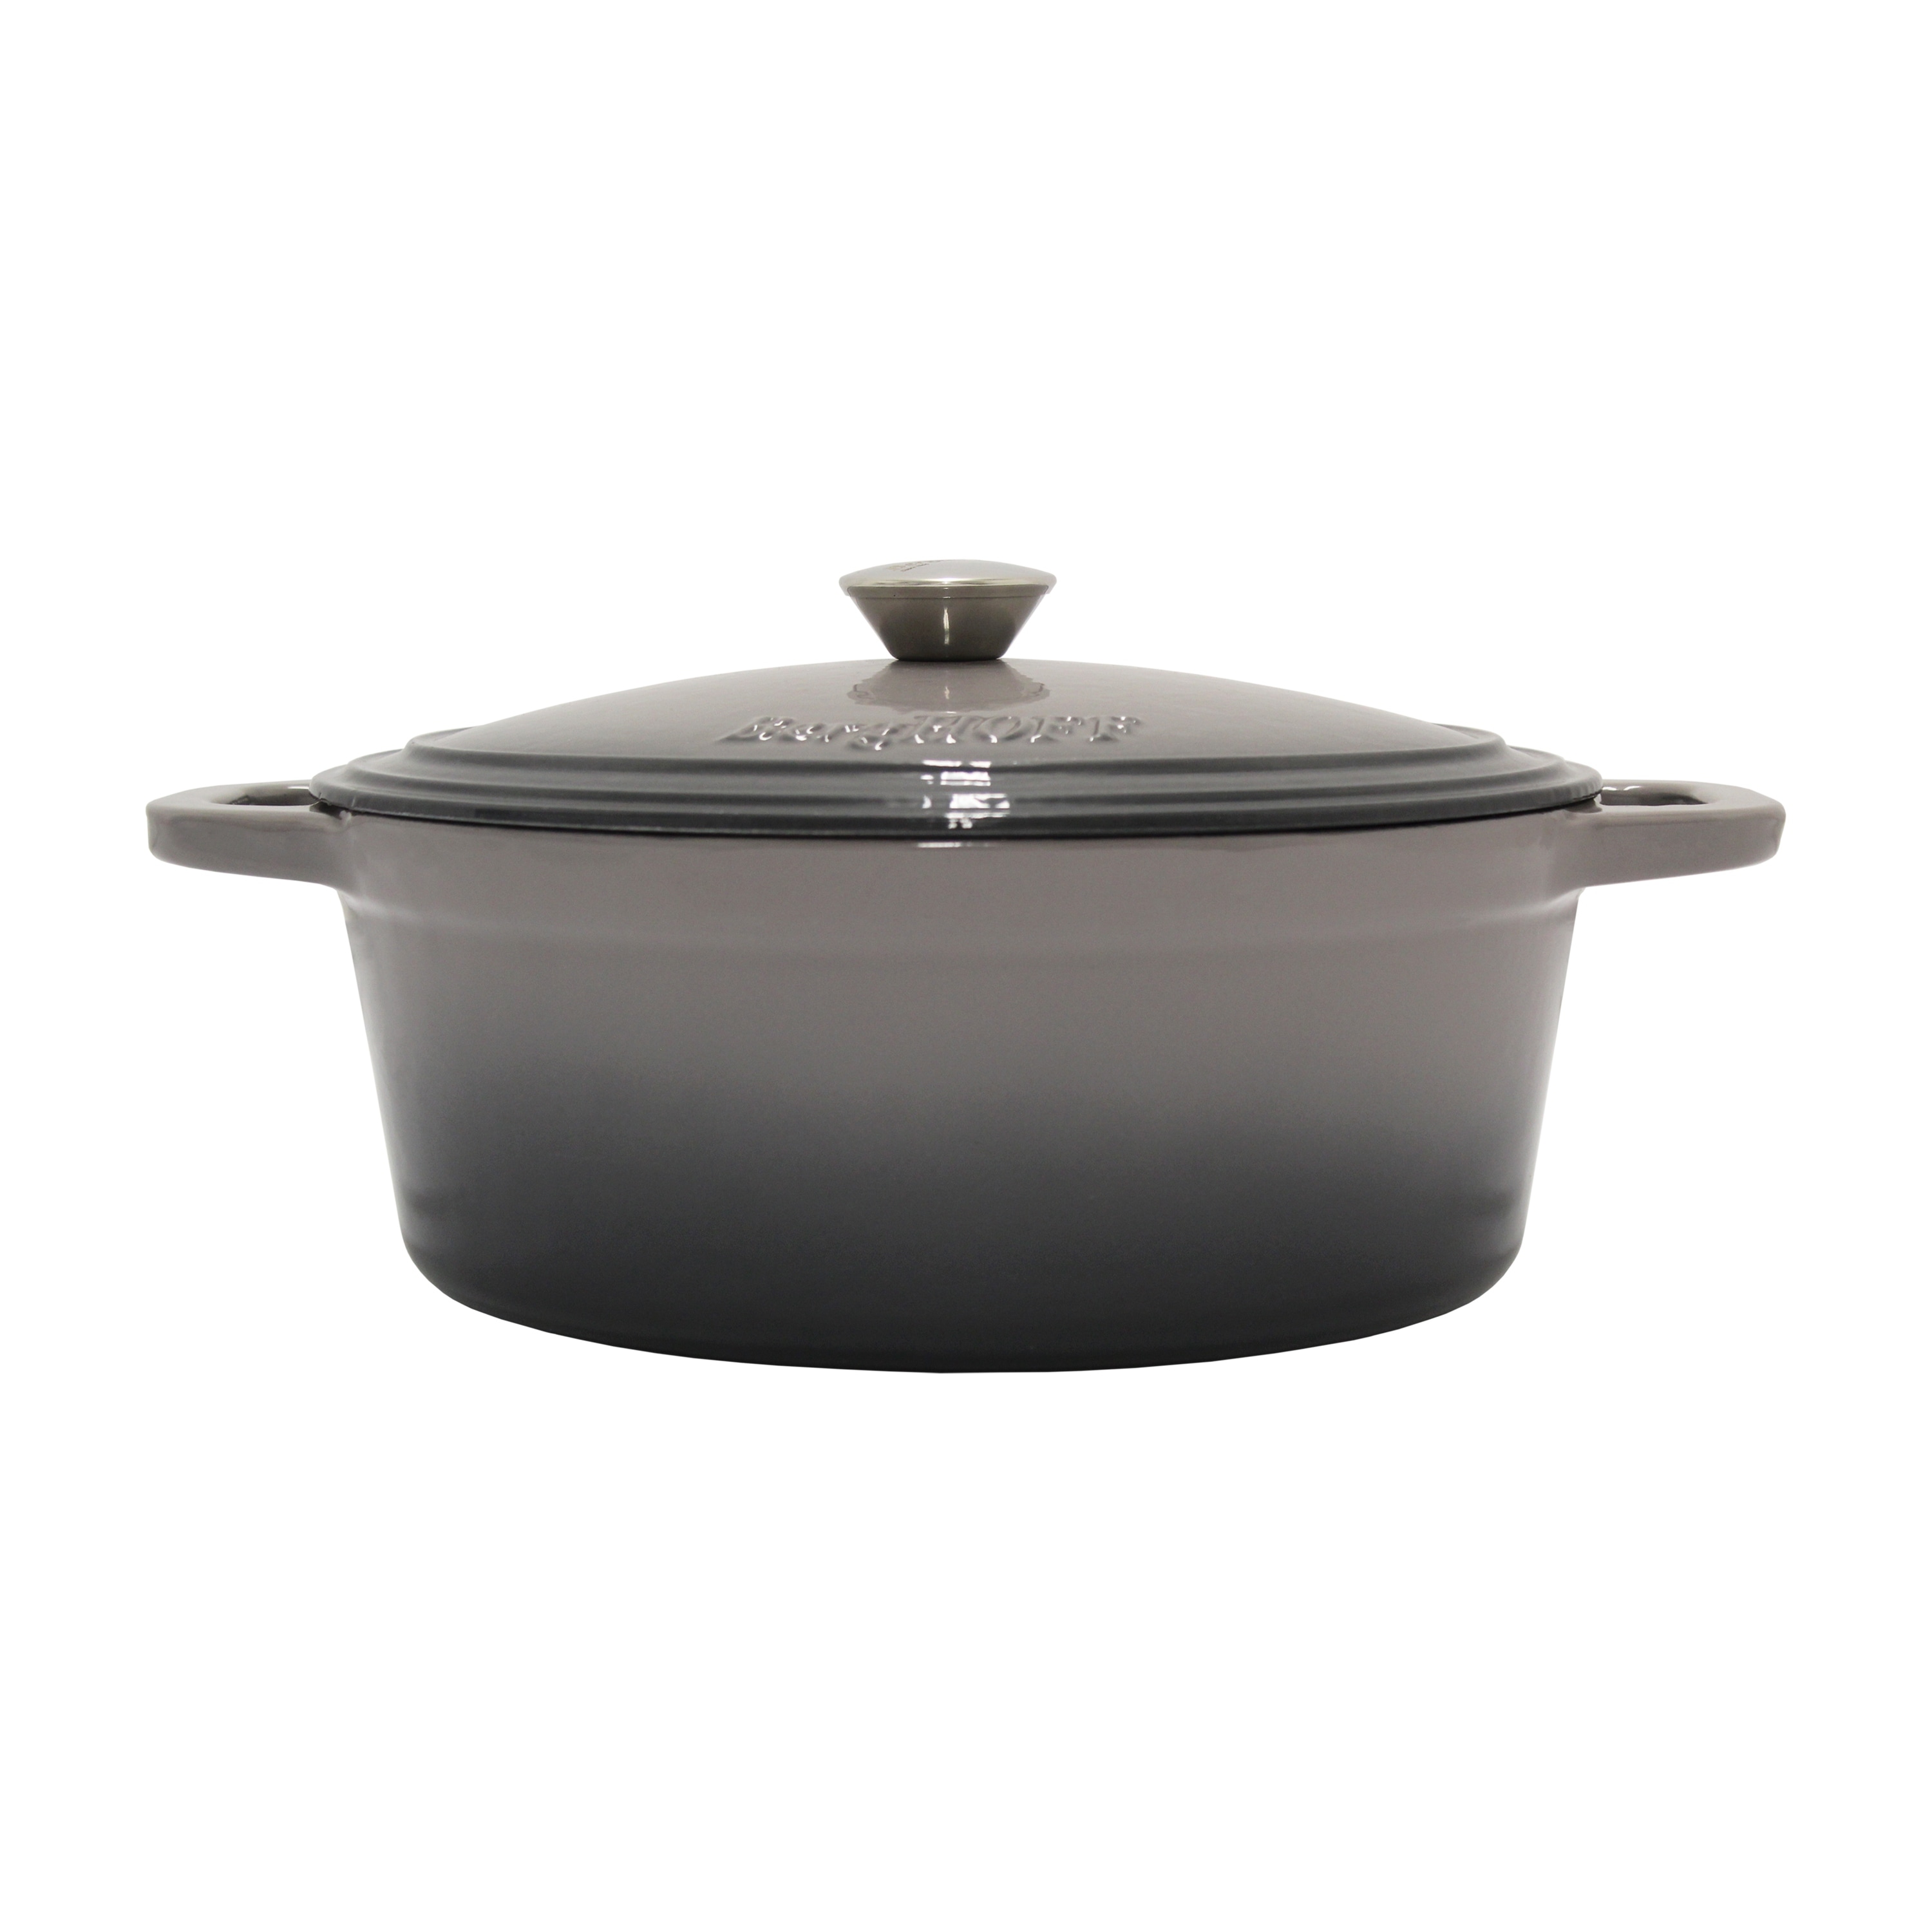 https://ak1.ostkcdn.com/images/products/is/images/direct/3a7f91d01abdde34dac501ab1218fd0ec38efe39/Neo-5qt-Cast-Iron-Oval-Cov-Dutch-Oven%2C-Oyster.jpg